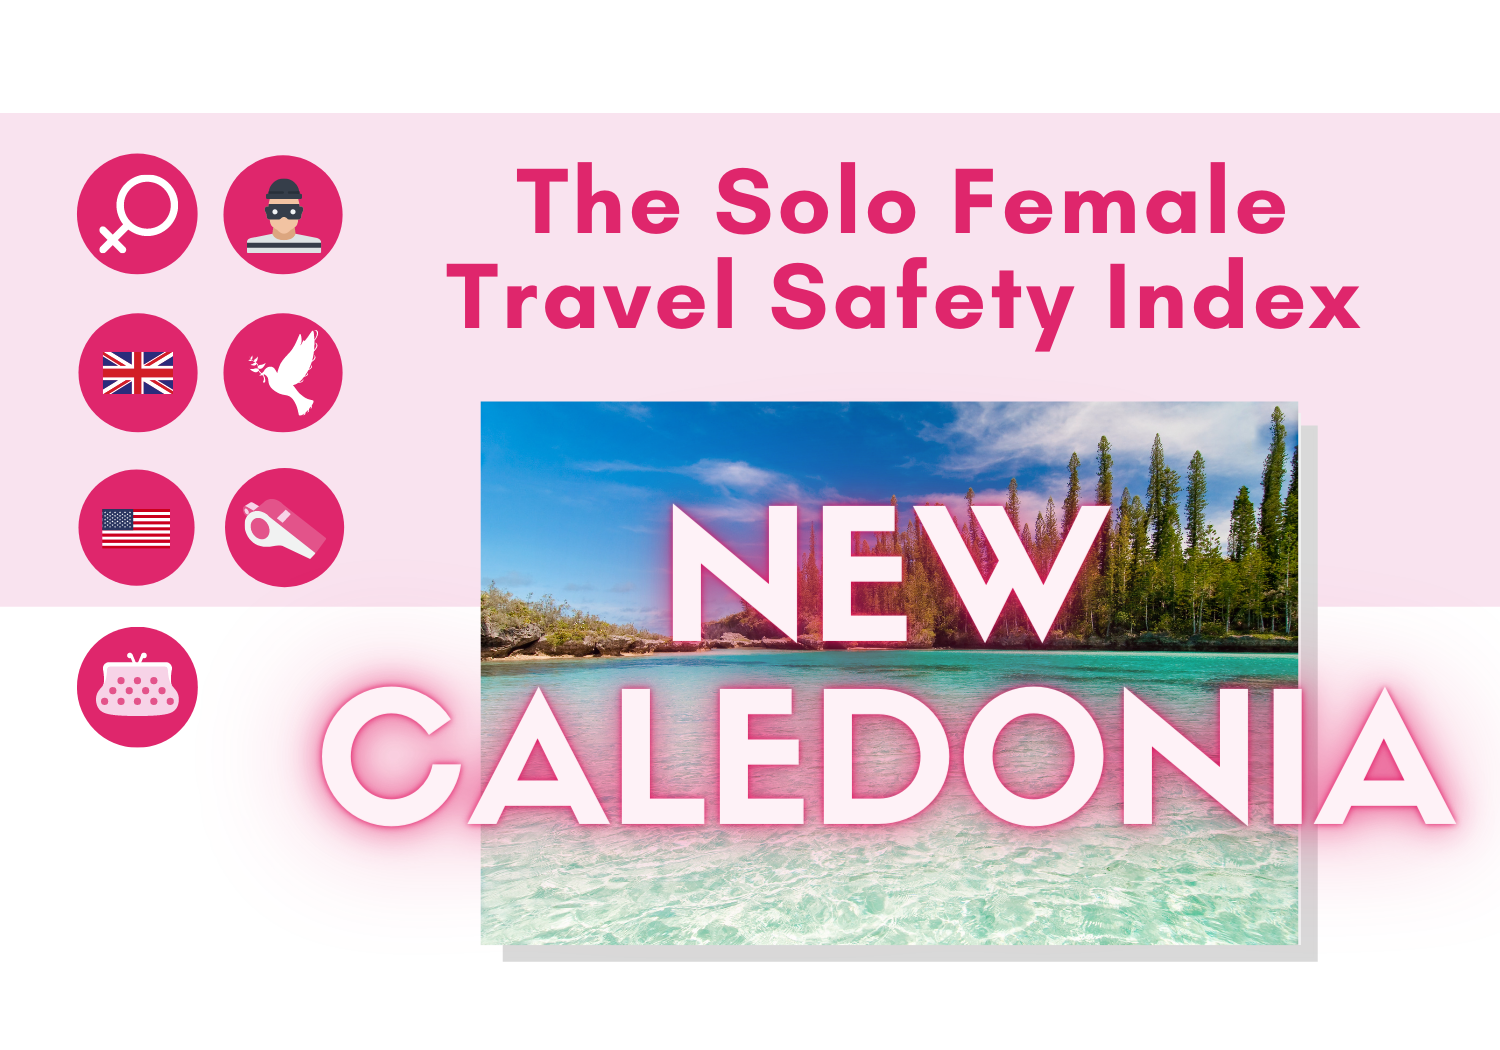 Solo female travel safety in New Caledonia